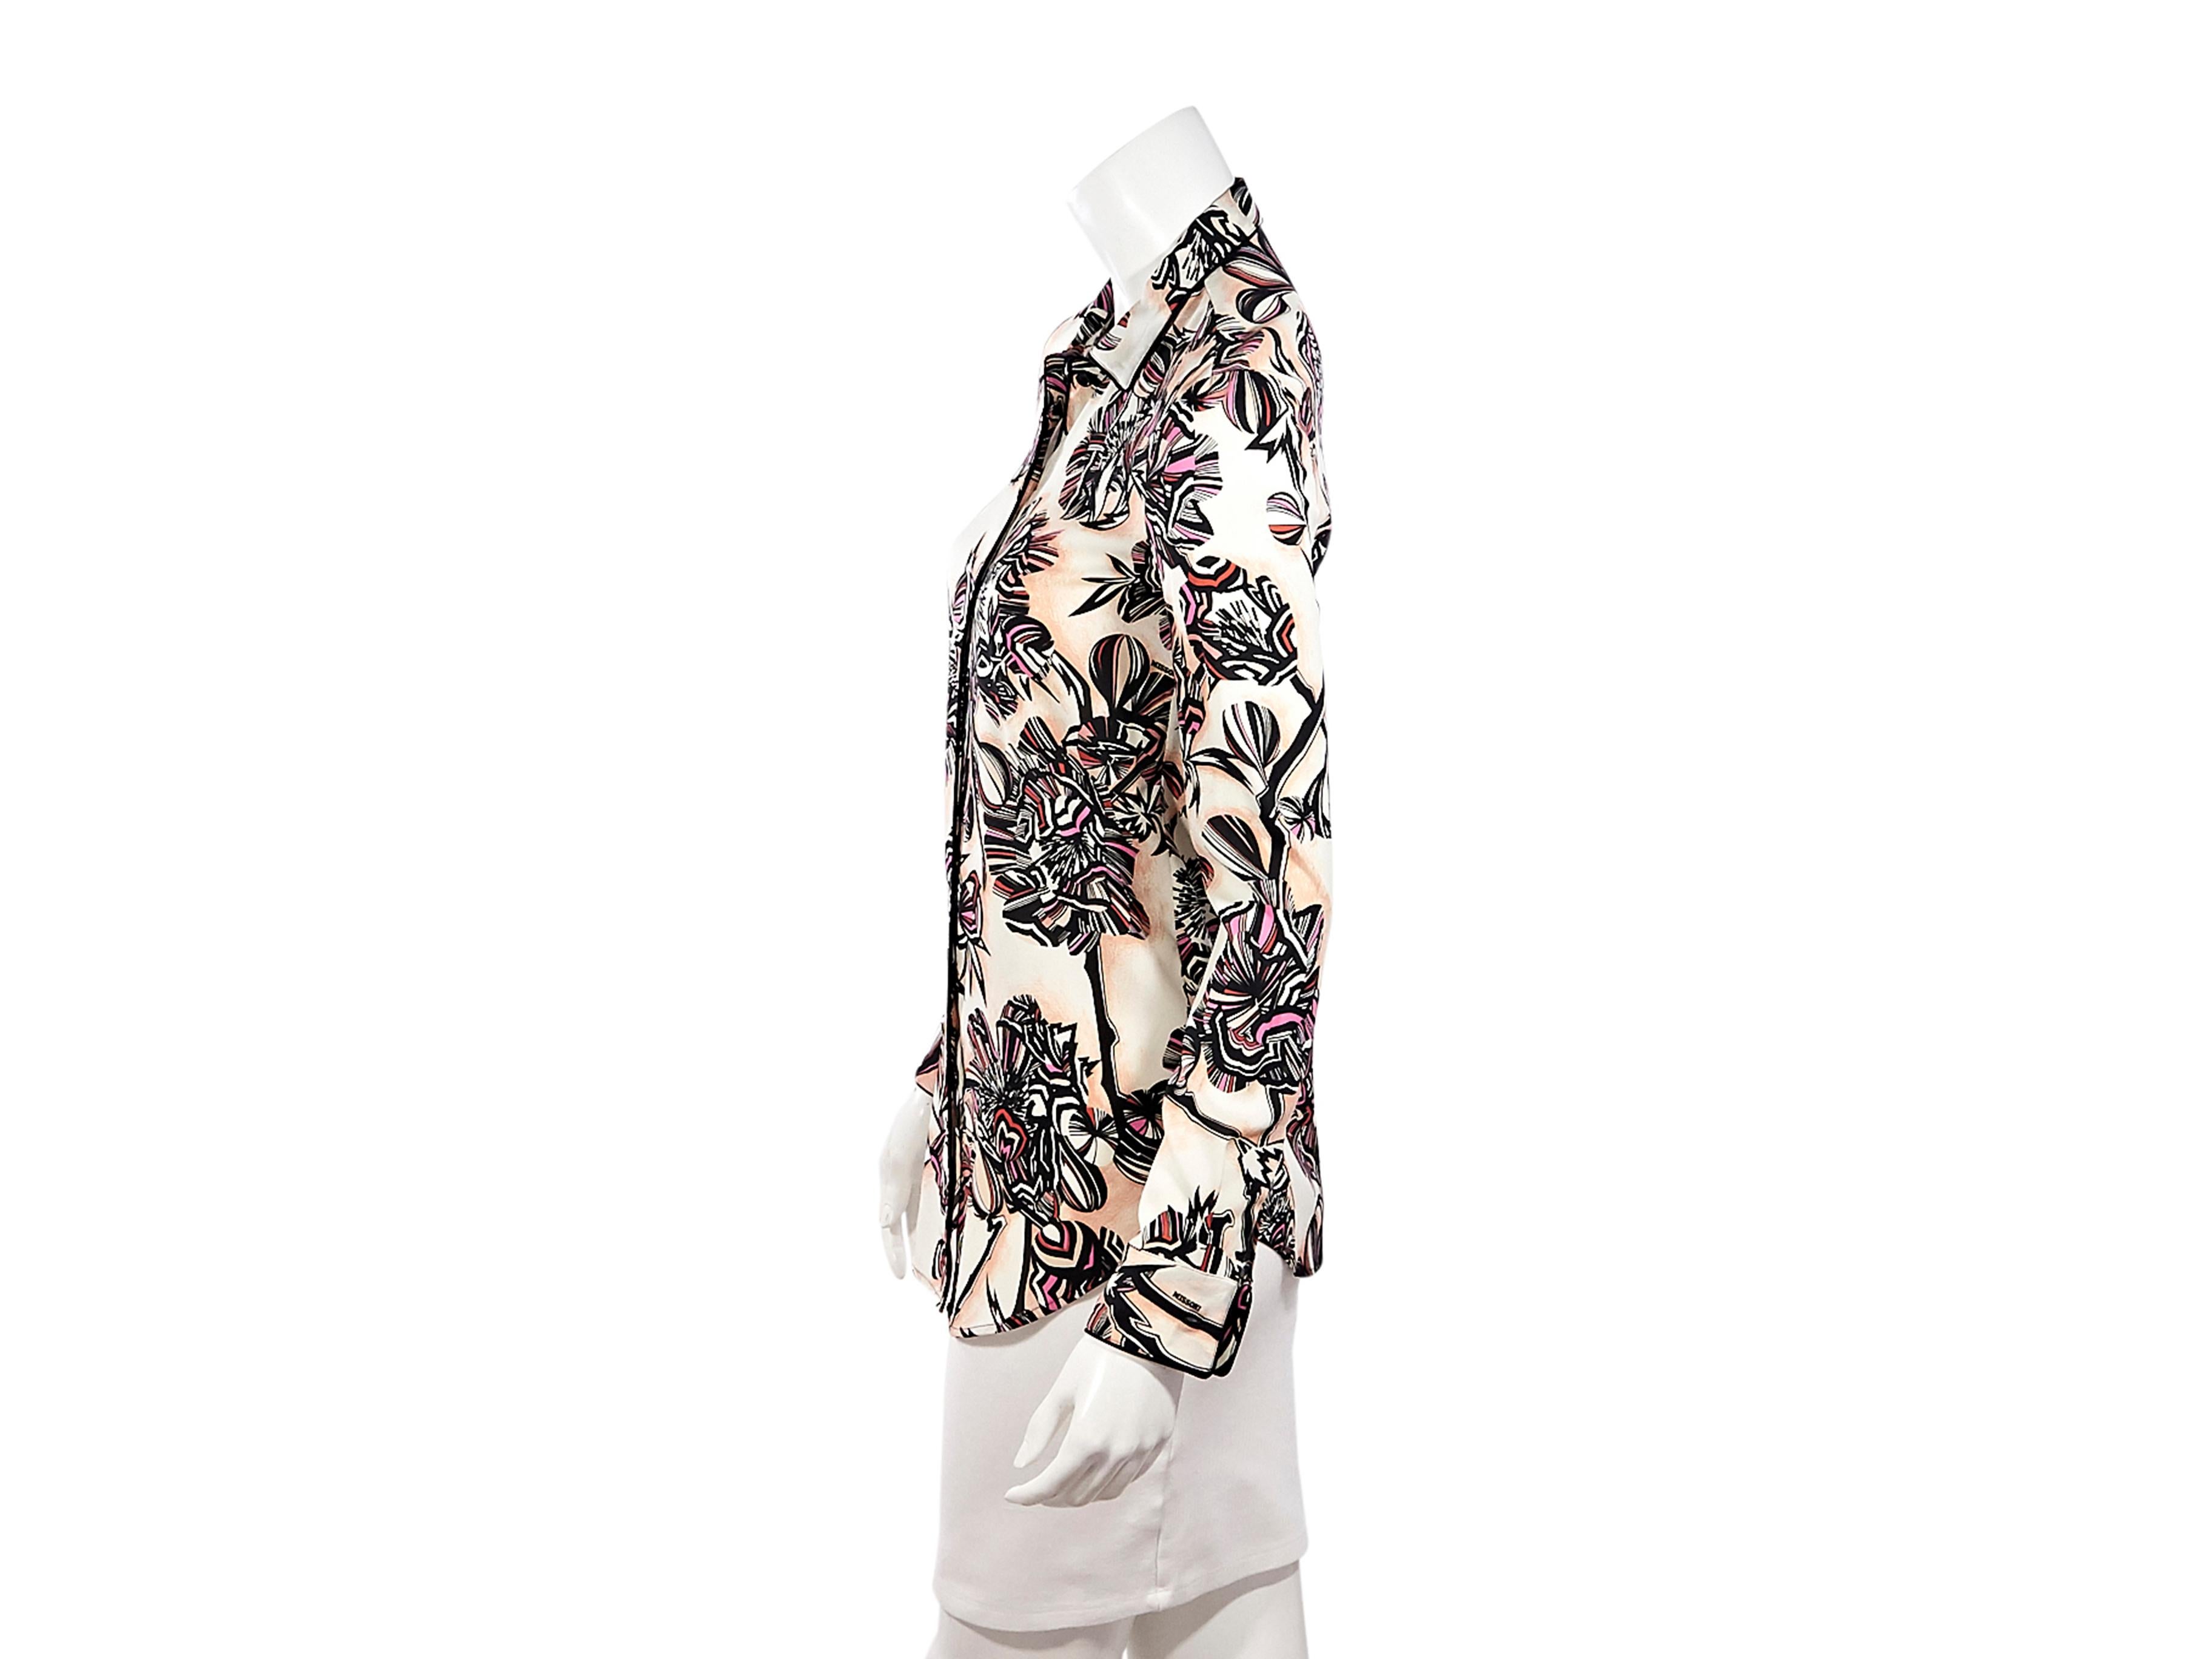 Product details:  Multicolor floral-printed blouse by Missoni.  Spread collar.  Long sleeves.  Single button cuffs.  Button-front closure.  Shirttail hem.  34